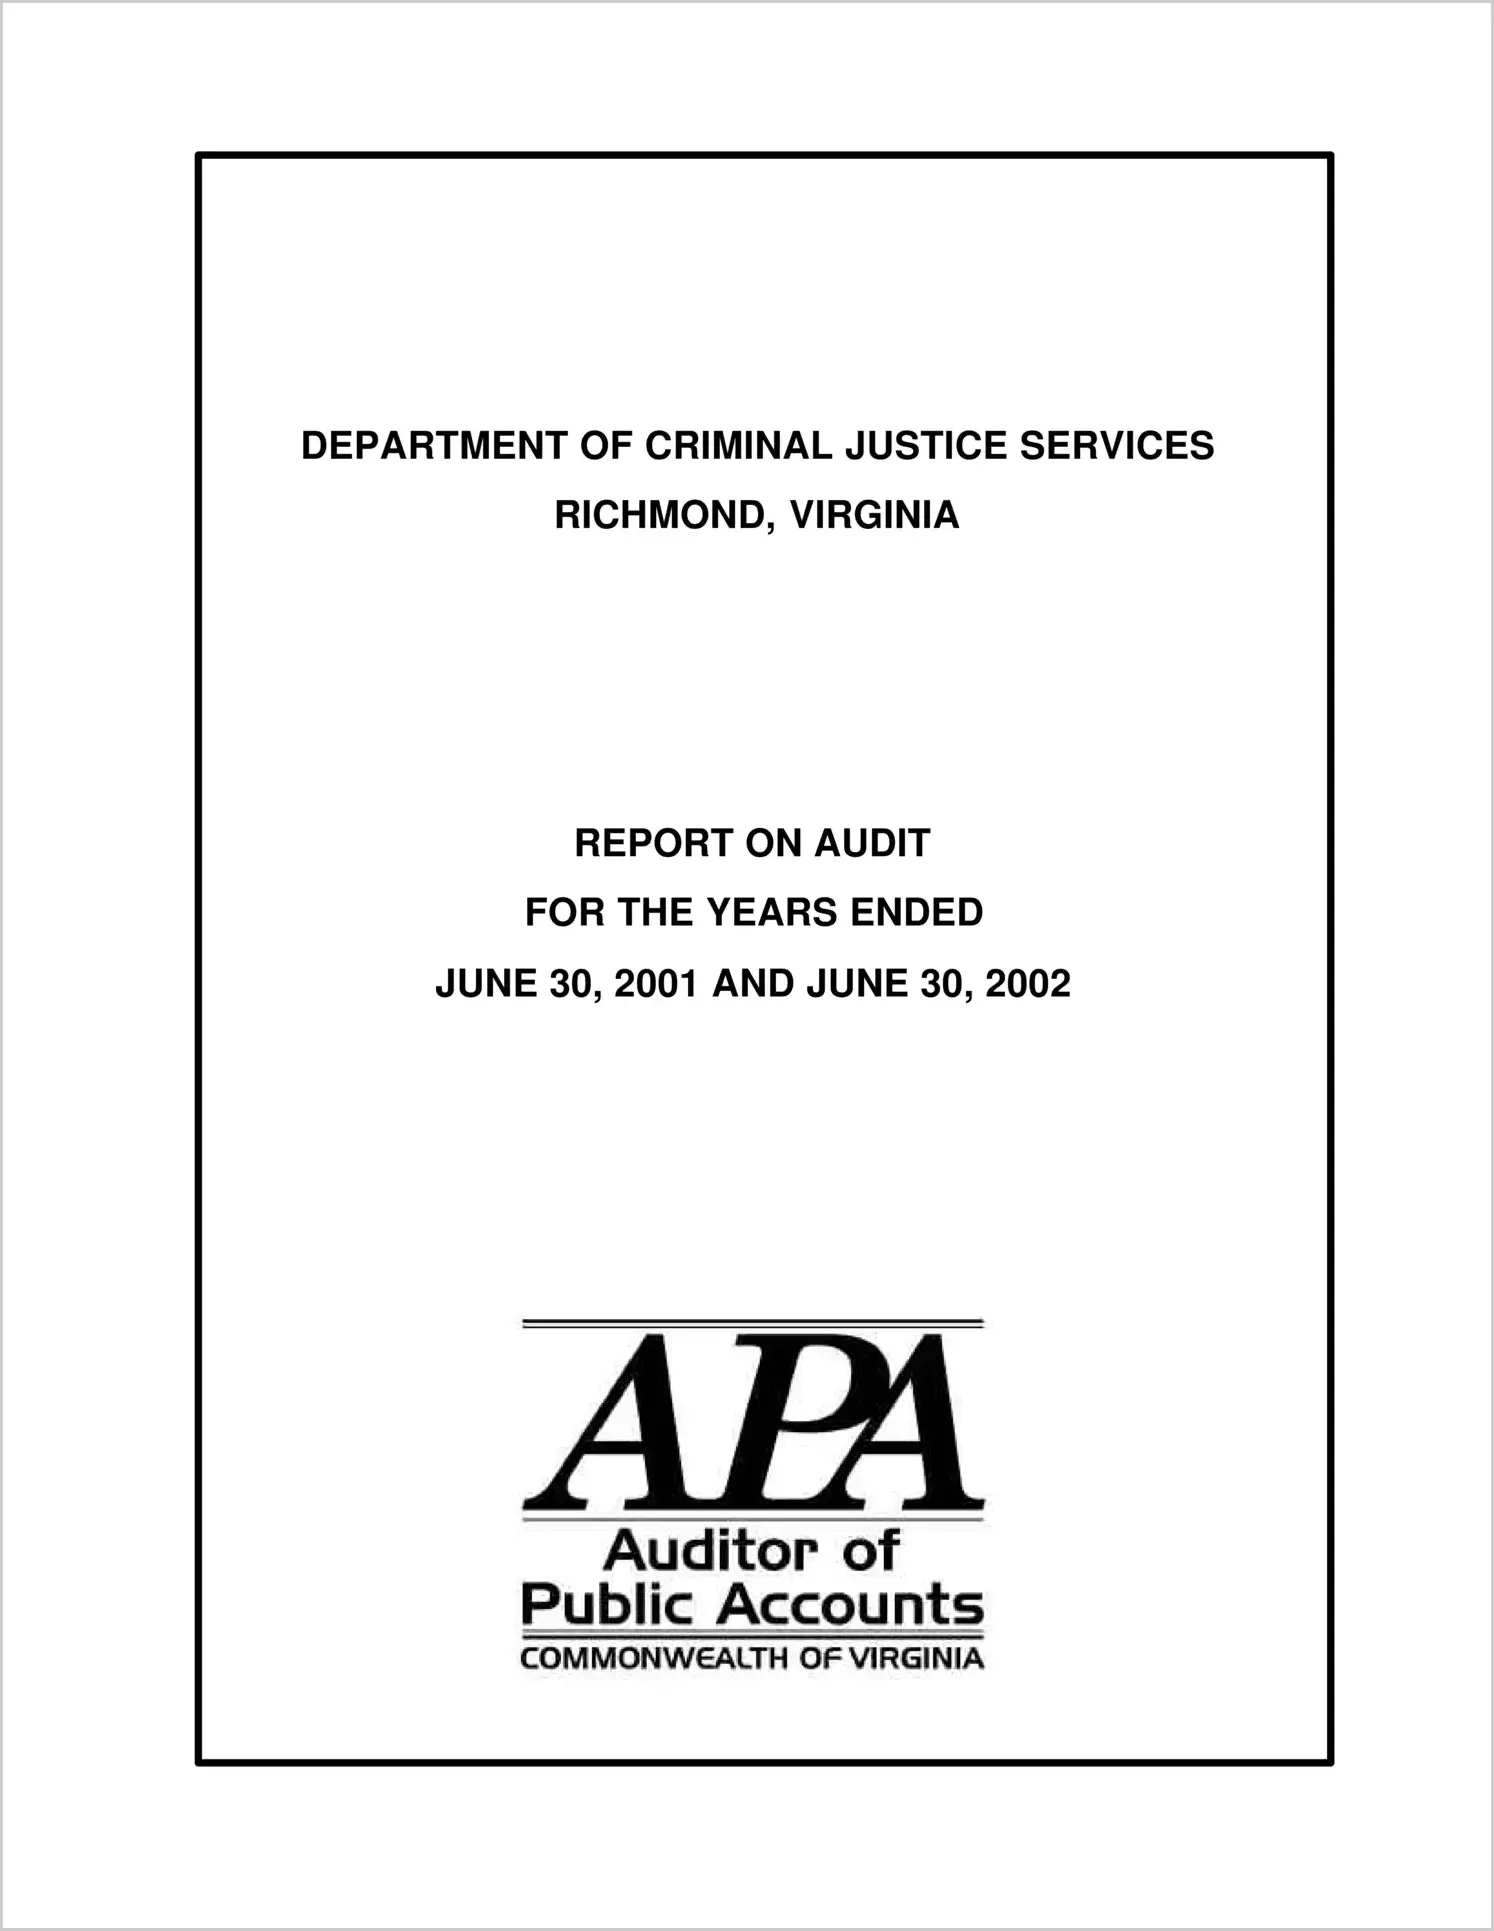 Department of Criminal Justice Services for the years ended June 30, 2001 and June 30, 2002